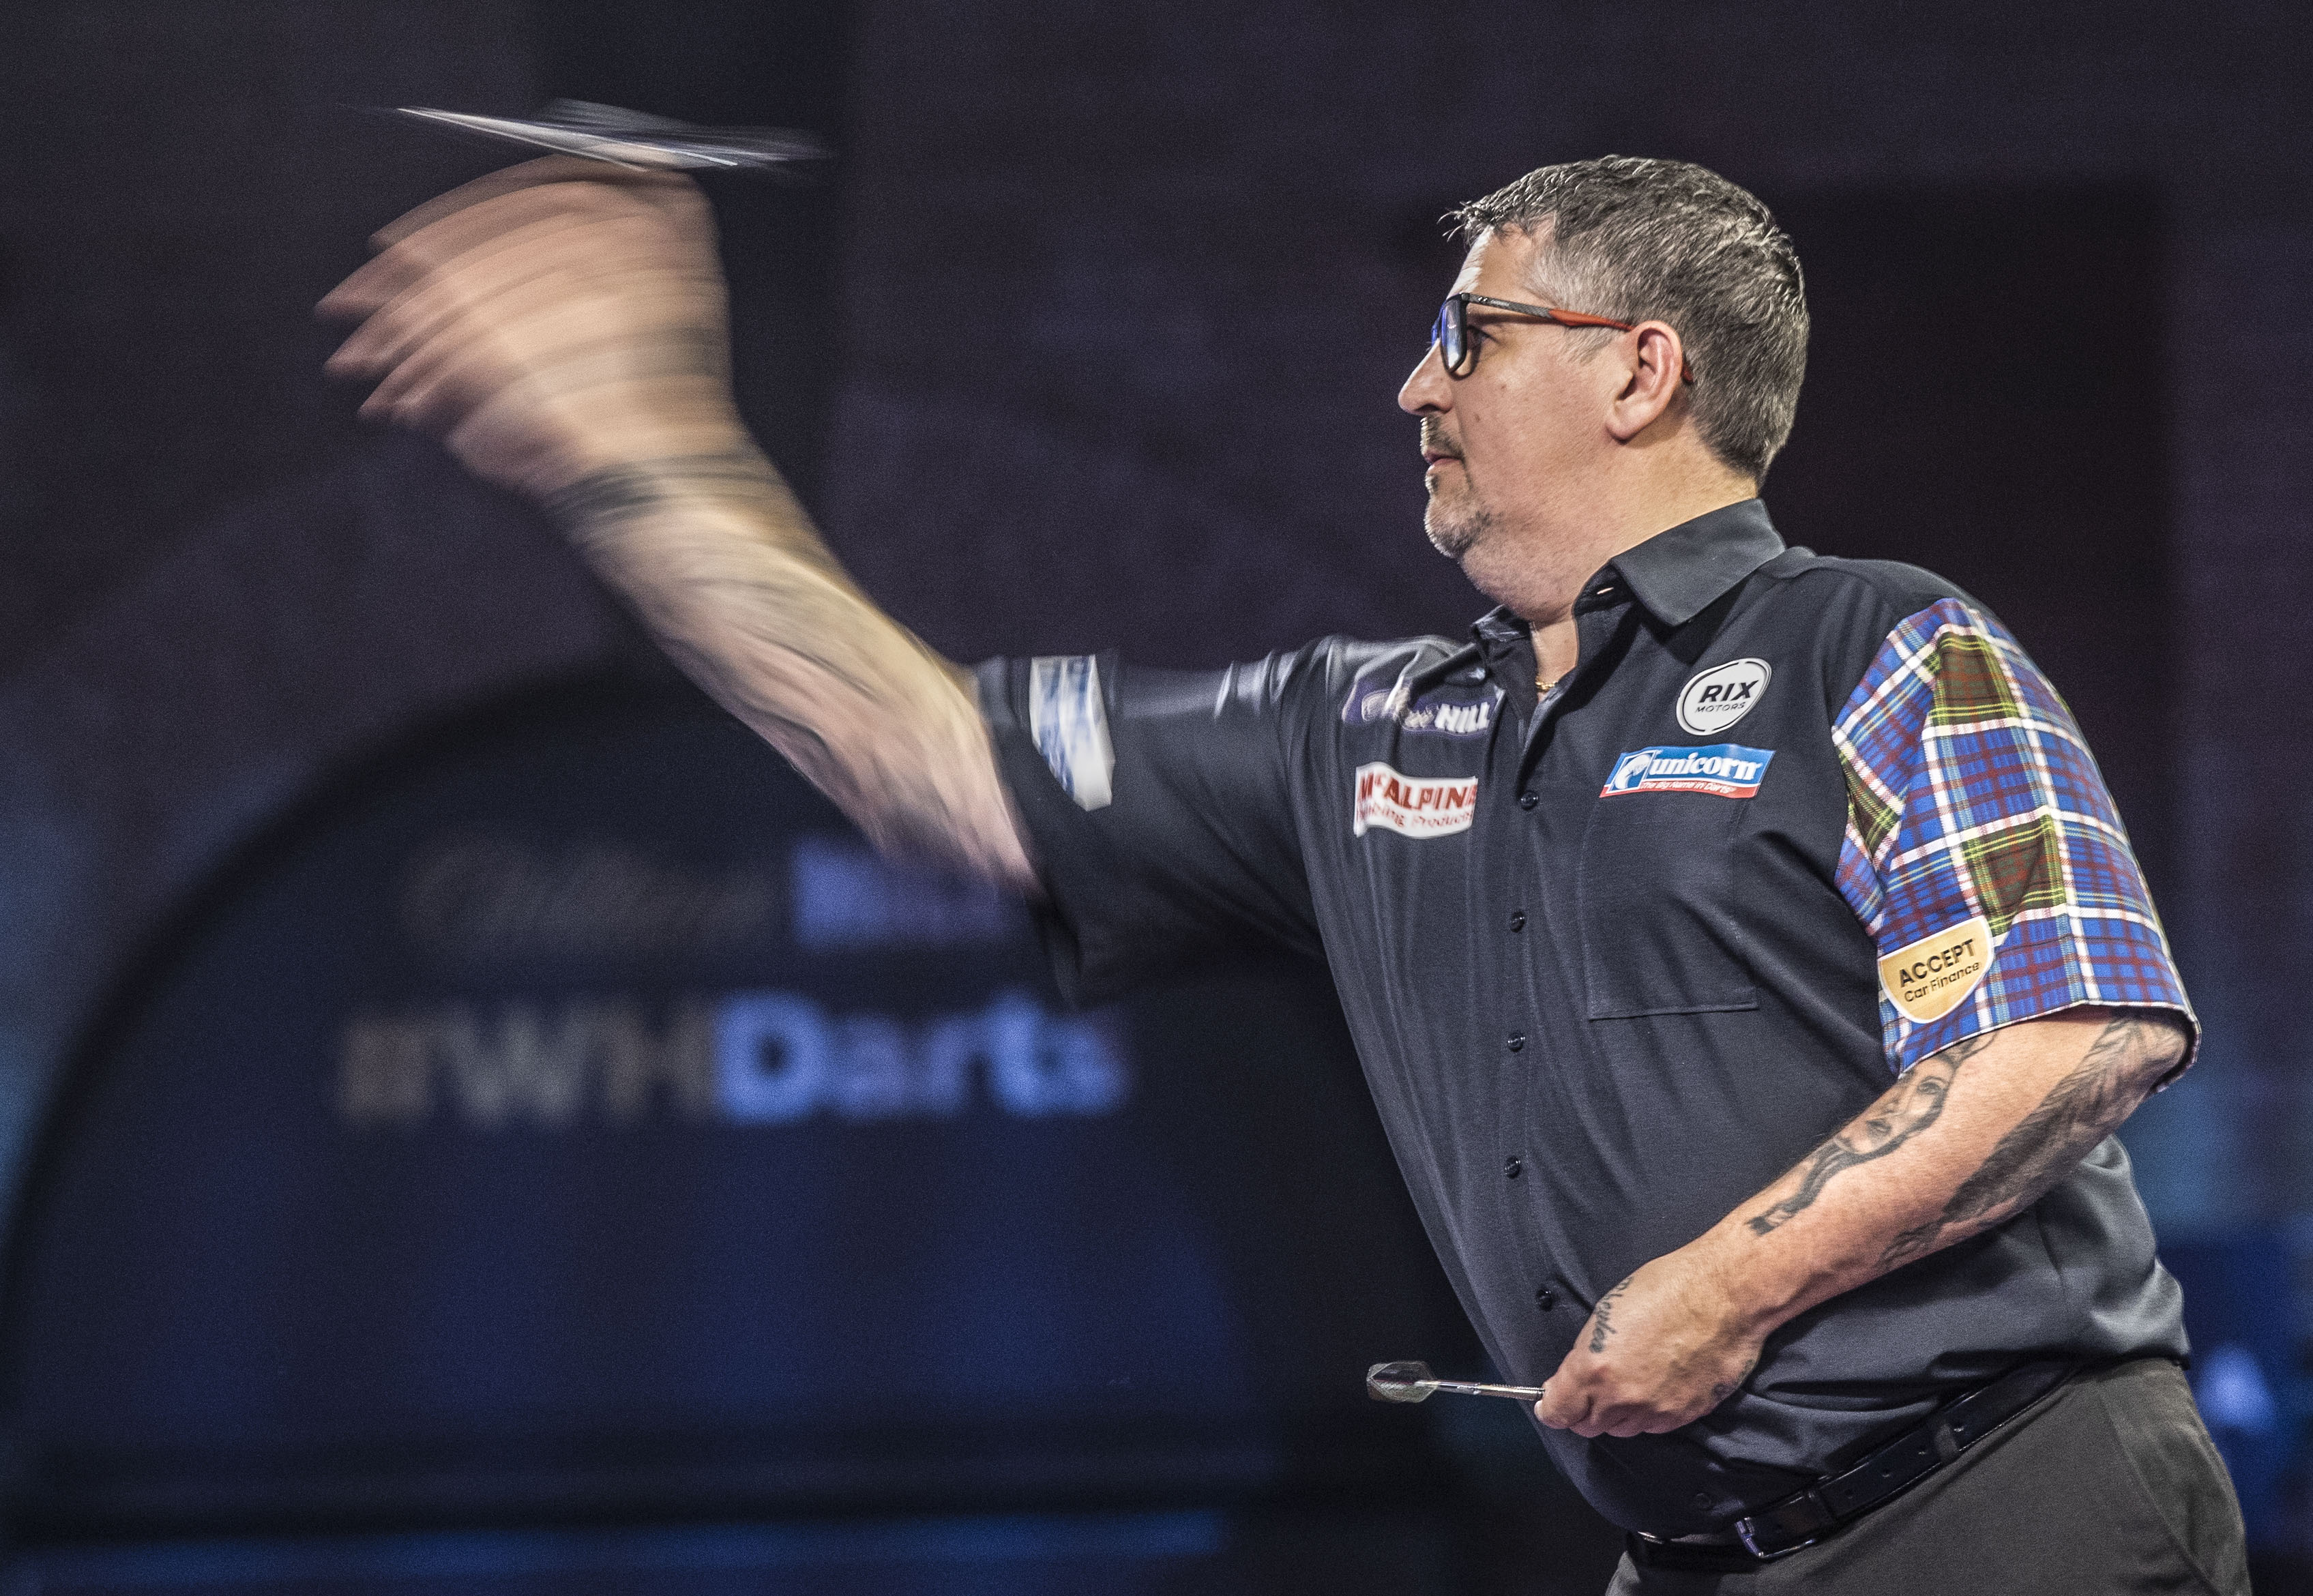 Gary Anderson has vowed to “keep battling on” despite patchy form and wants glory in New York!